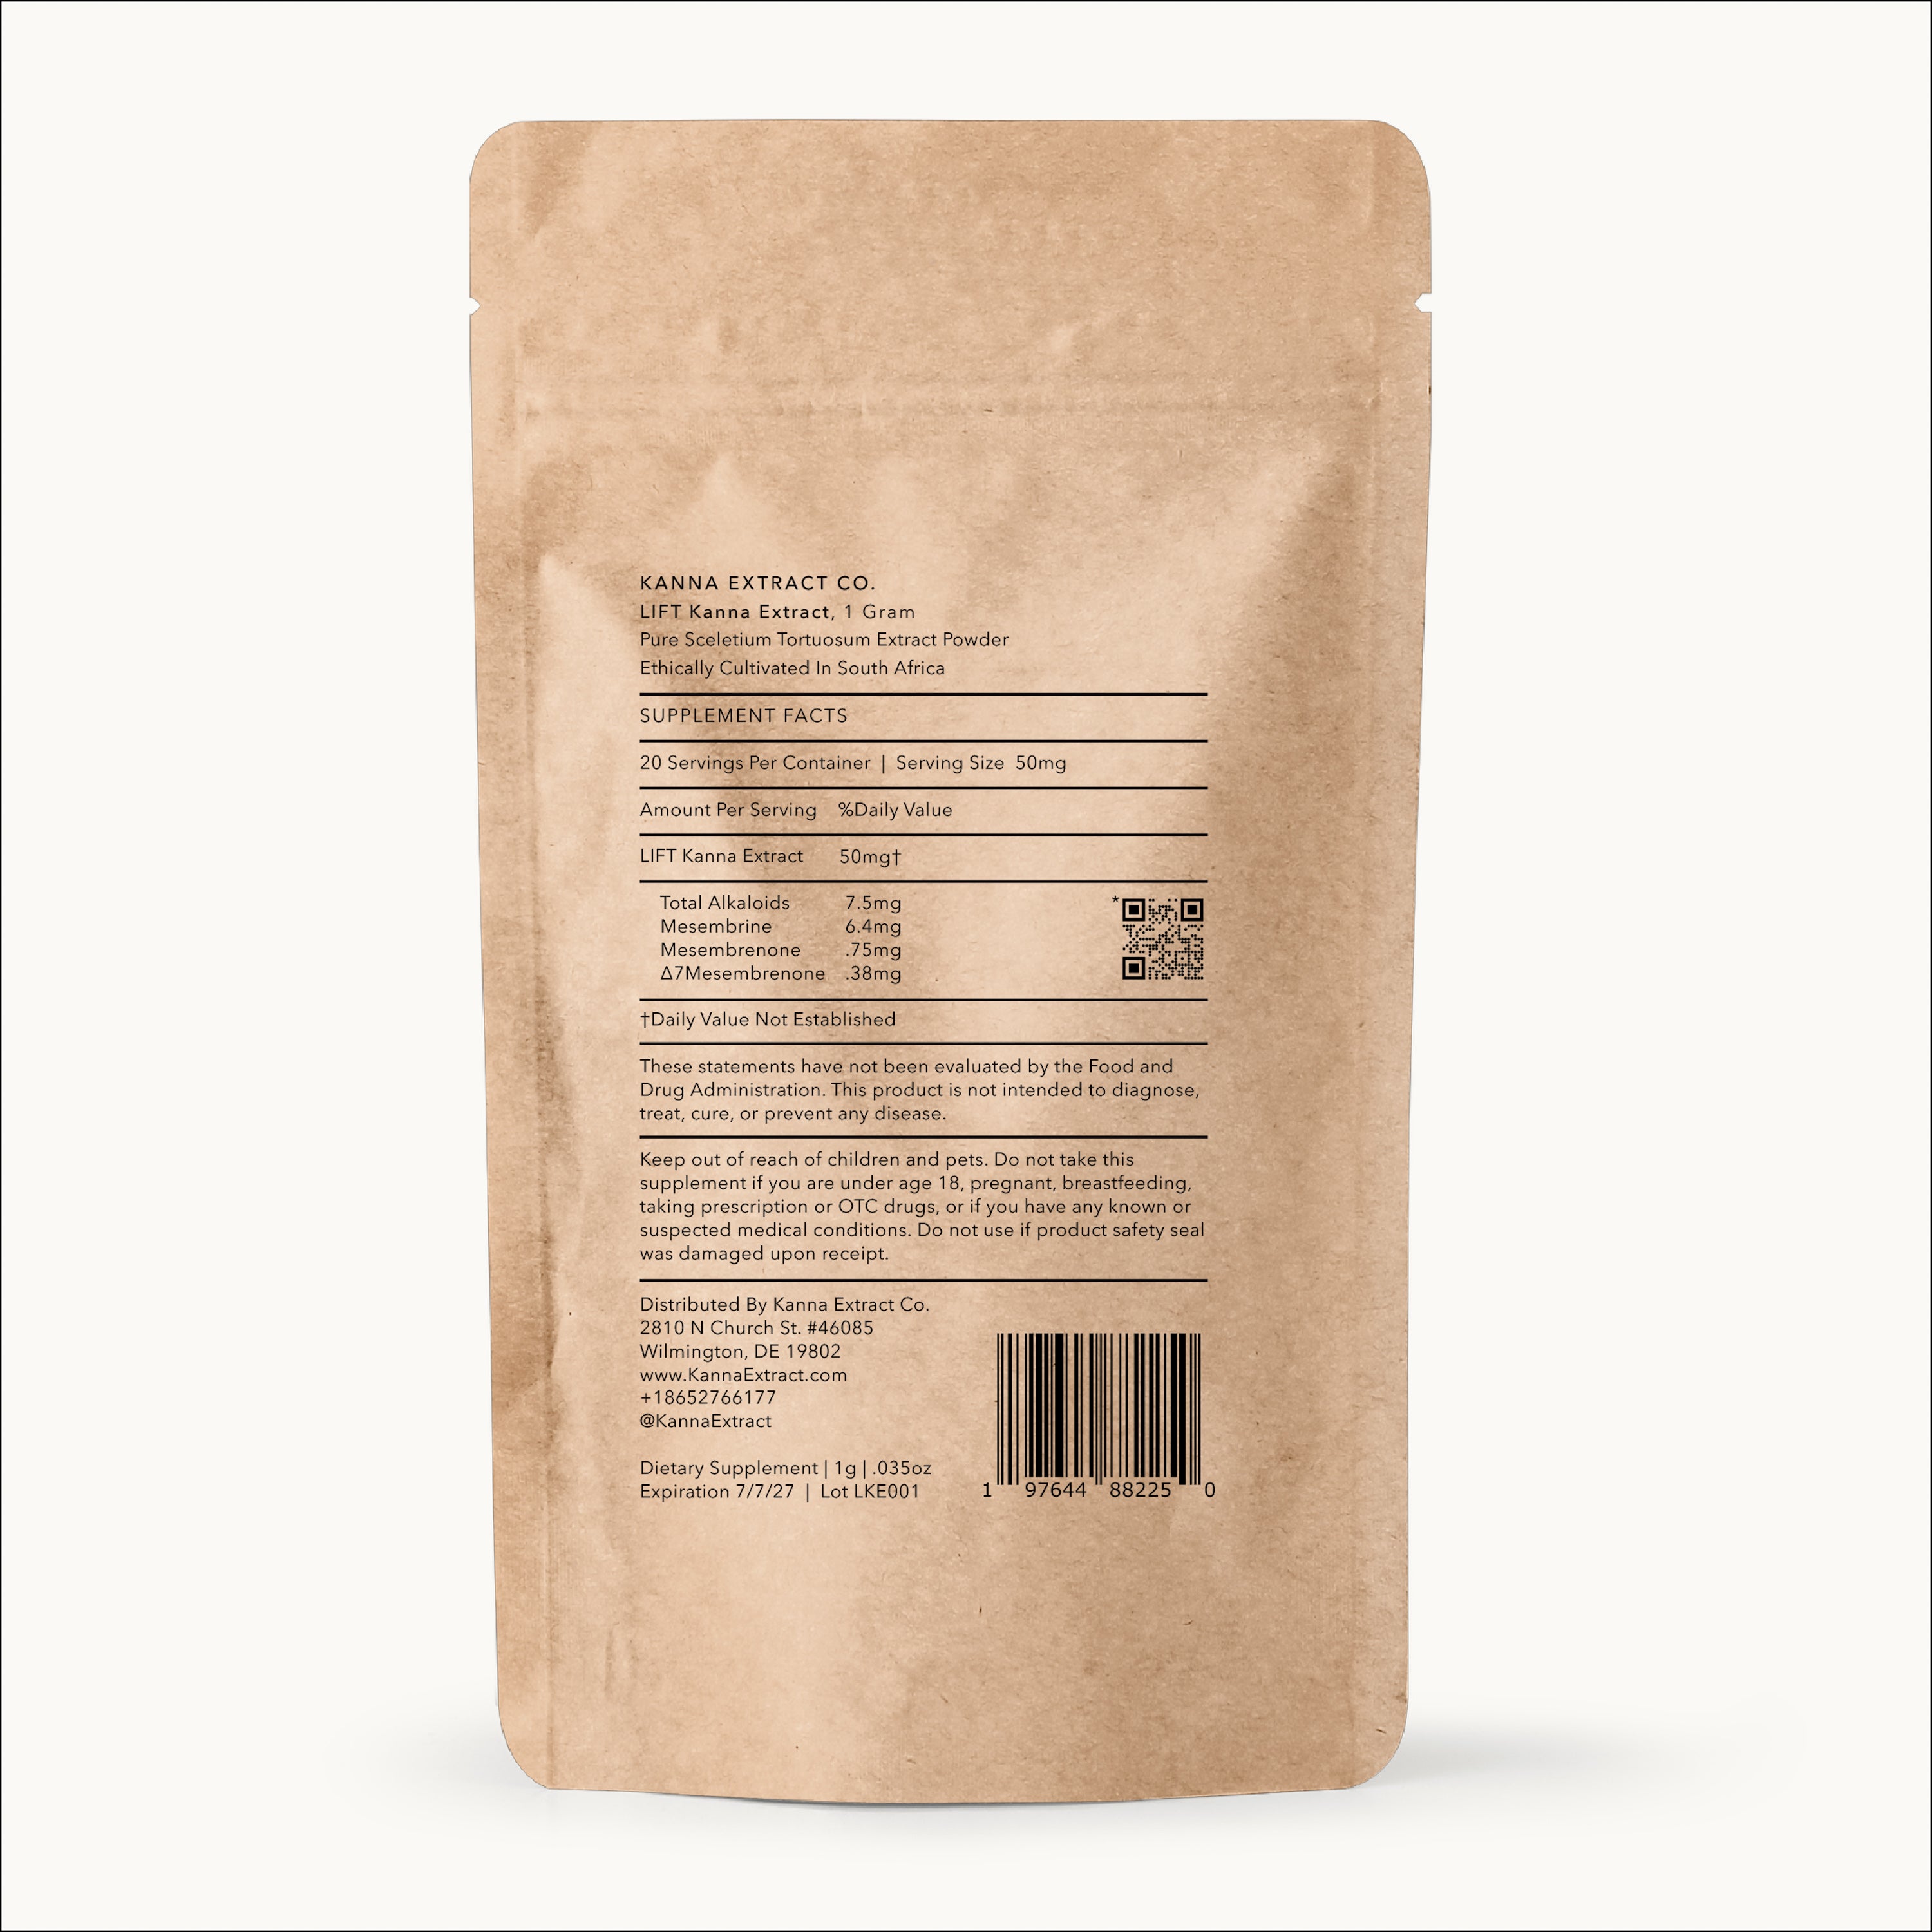 Kanna Extract Co. LIFT wholesale bulk kanna extract made from ethically cultivated sceletium tortuosum organically grown in South Africa for potent mesembrine alkaloids